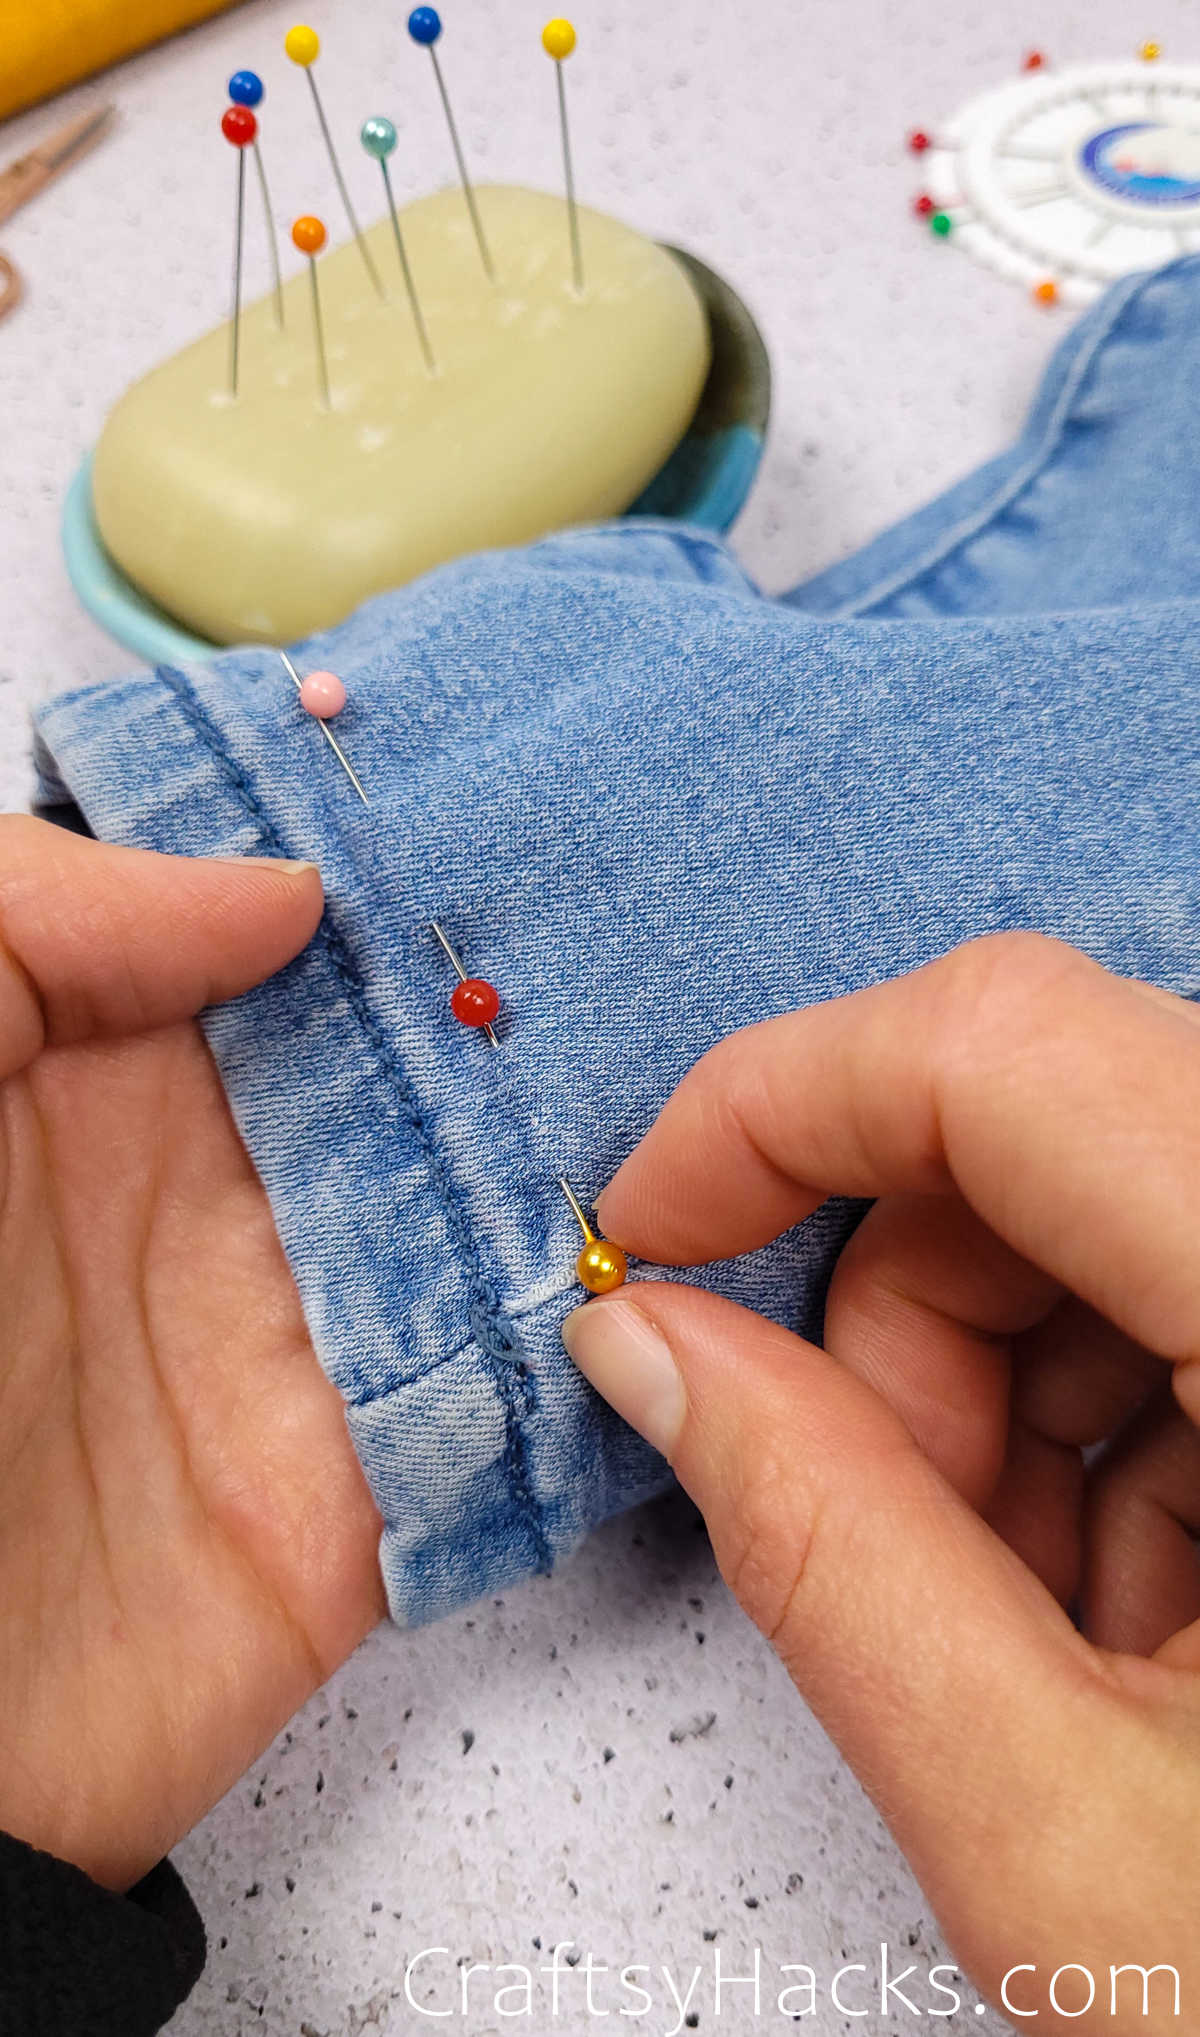 Use Bar Soap to Help Pins Glide Through the Fabric